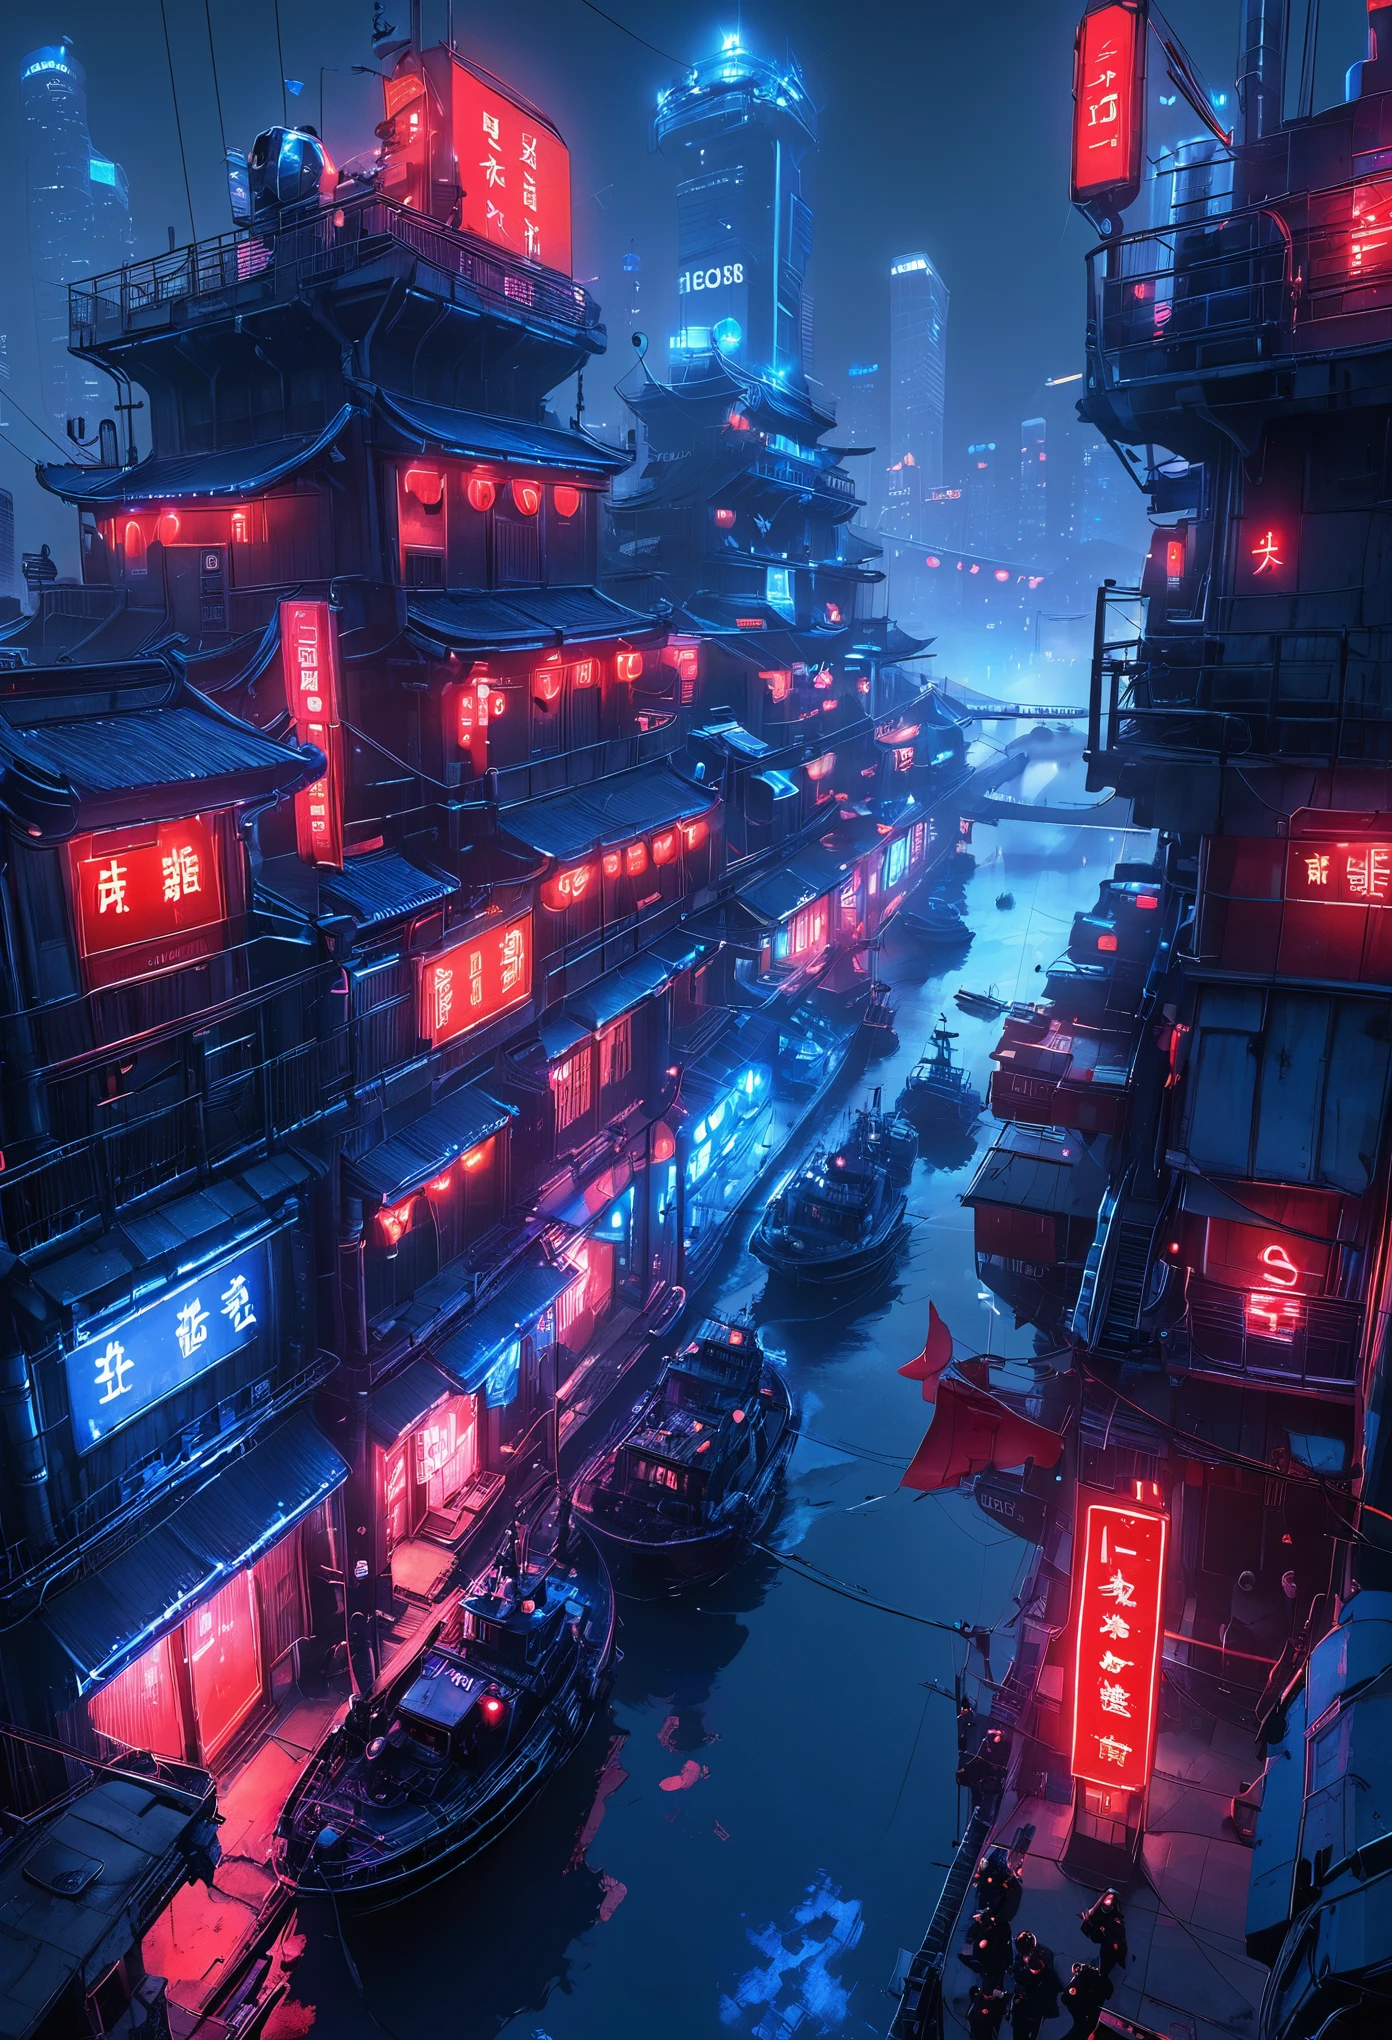 CyberCity, (blue:1.3)，（red:1.4）,(harbor:1.3), (ship:1.2),  neon lights, scenery, chinese_building, outdoors, road, night, sign, street, riot police,

criminals,(bird eye view:1.2),